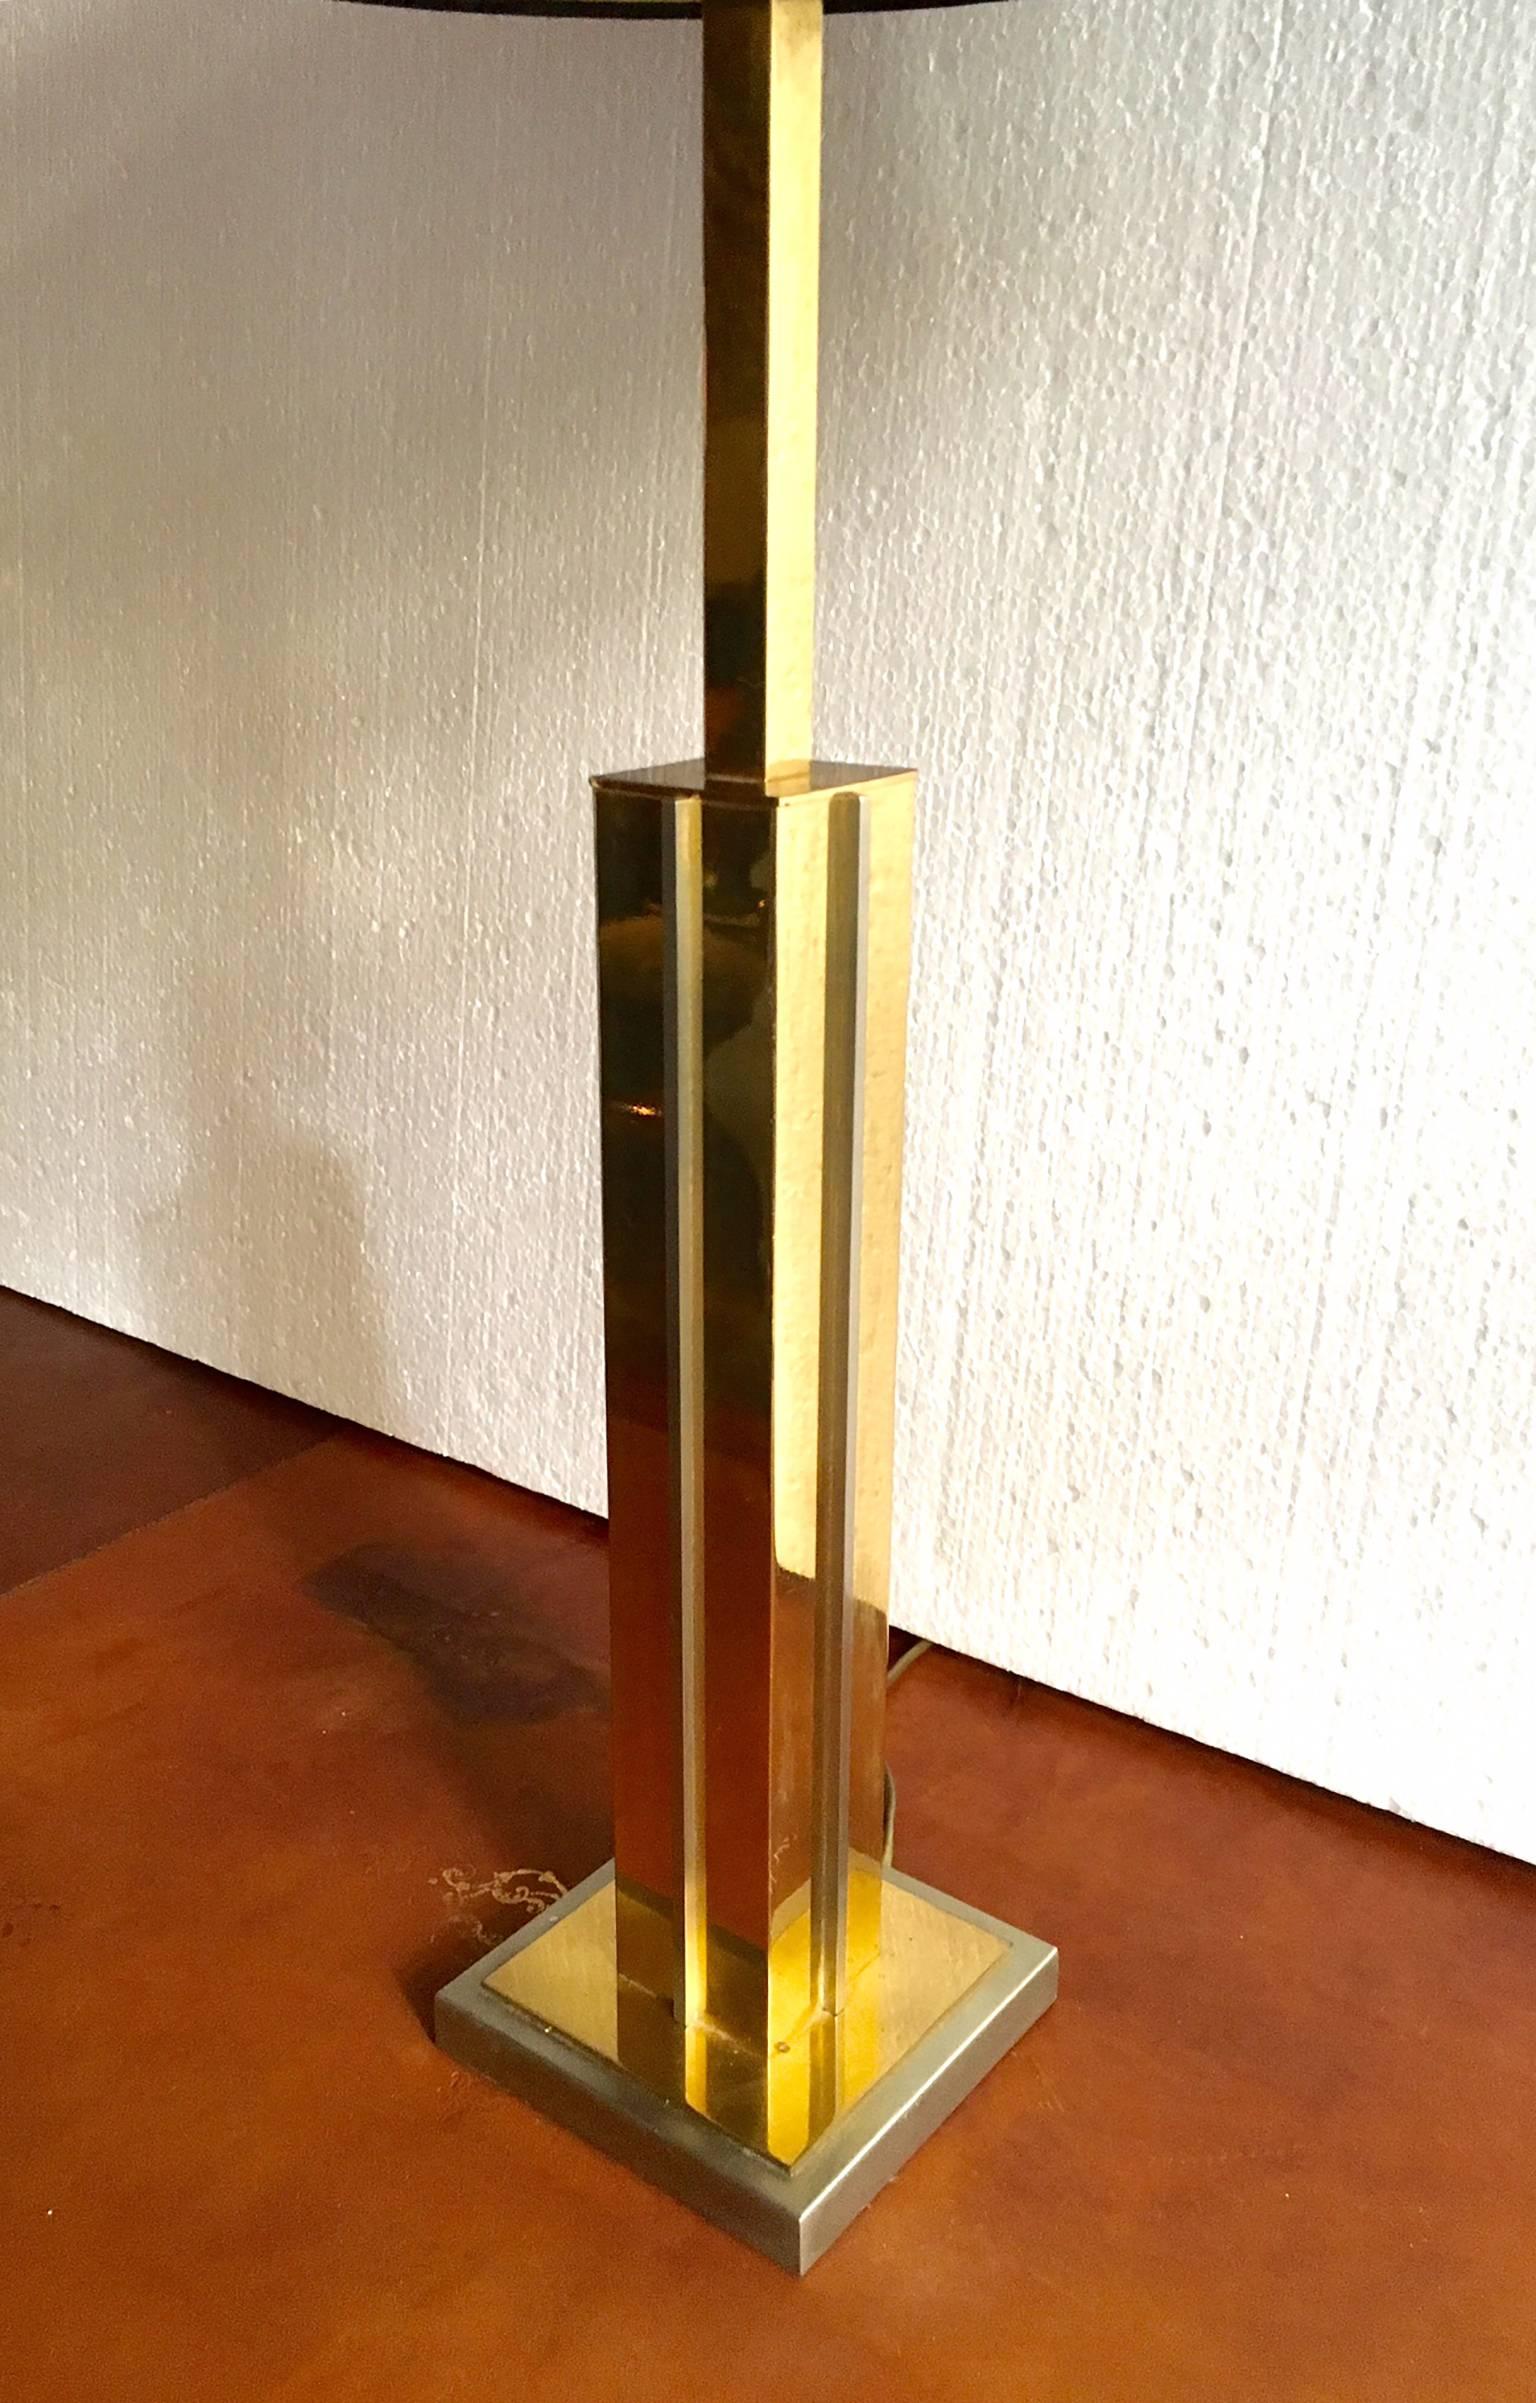 Table lamp in Willy Rizzo style, with npolished and brushed brass finish on stem and base, new black shade, with gold inside.